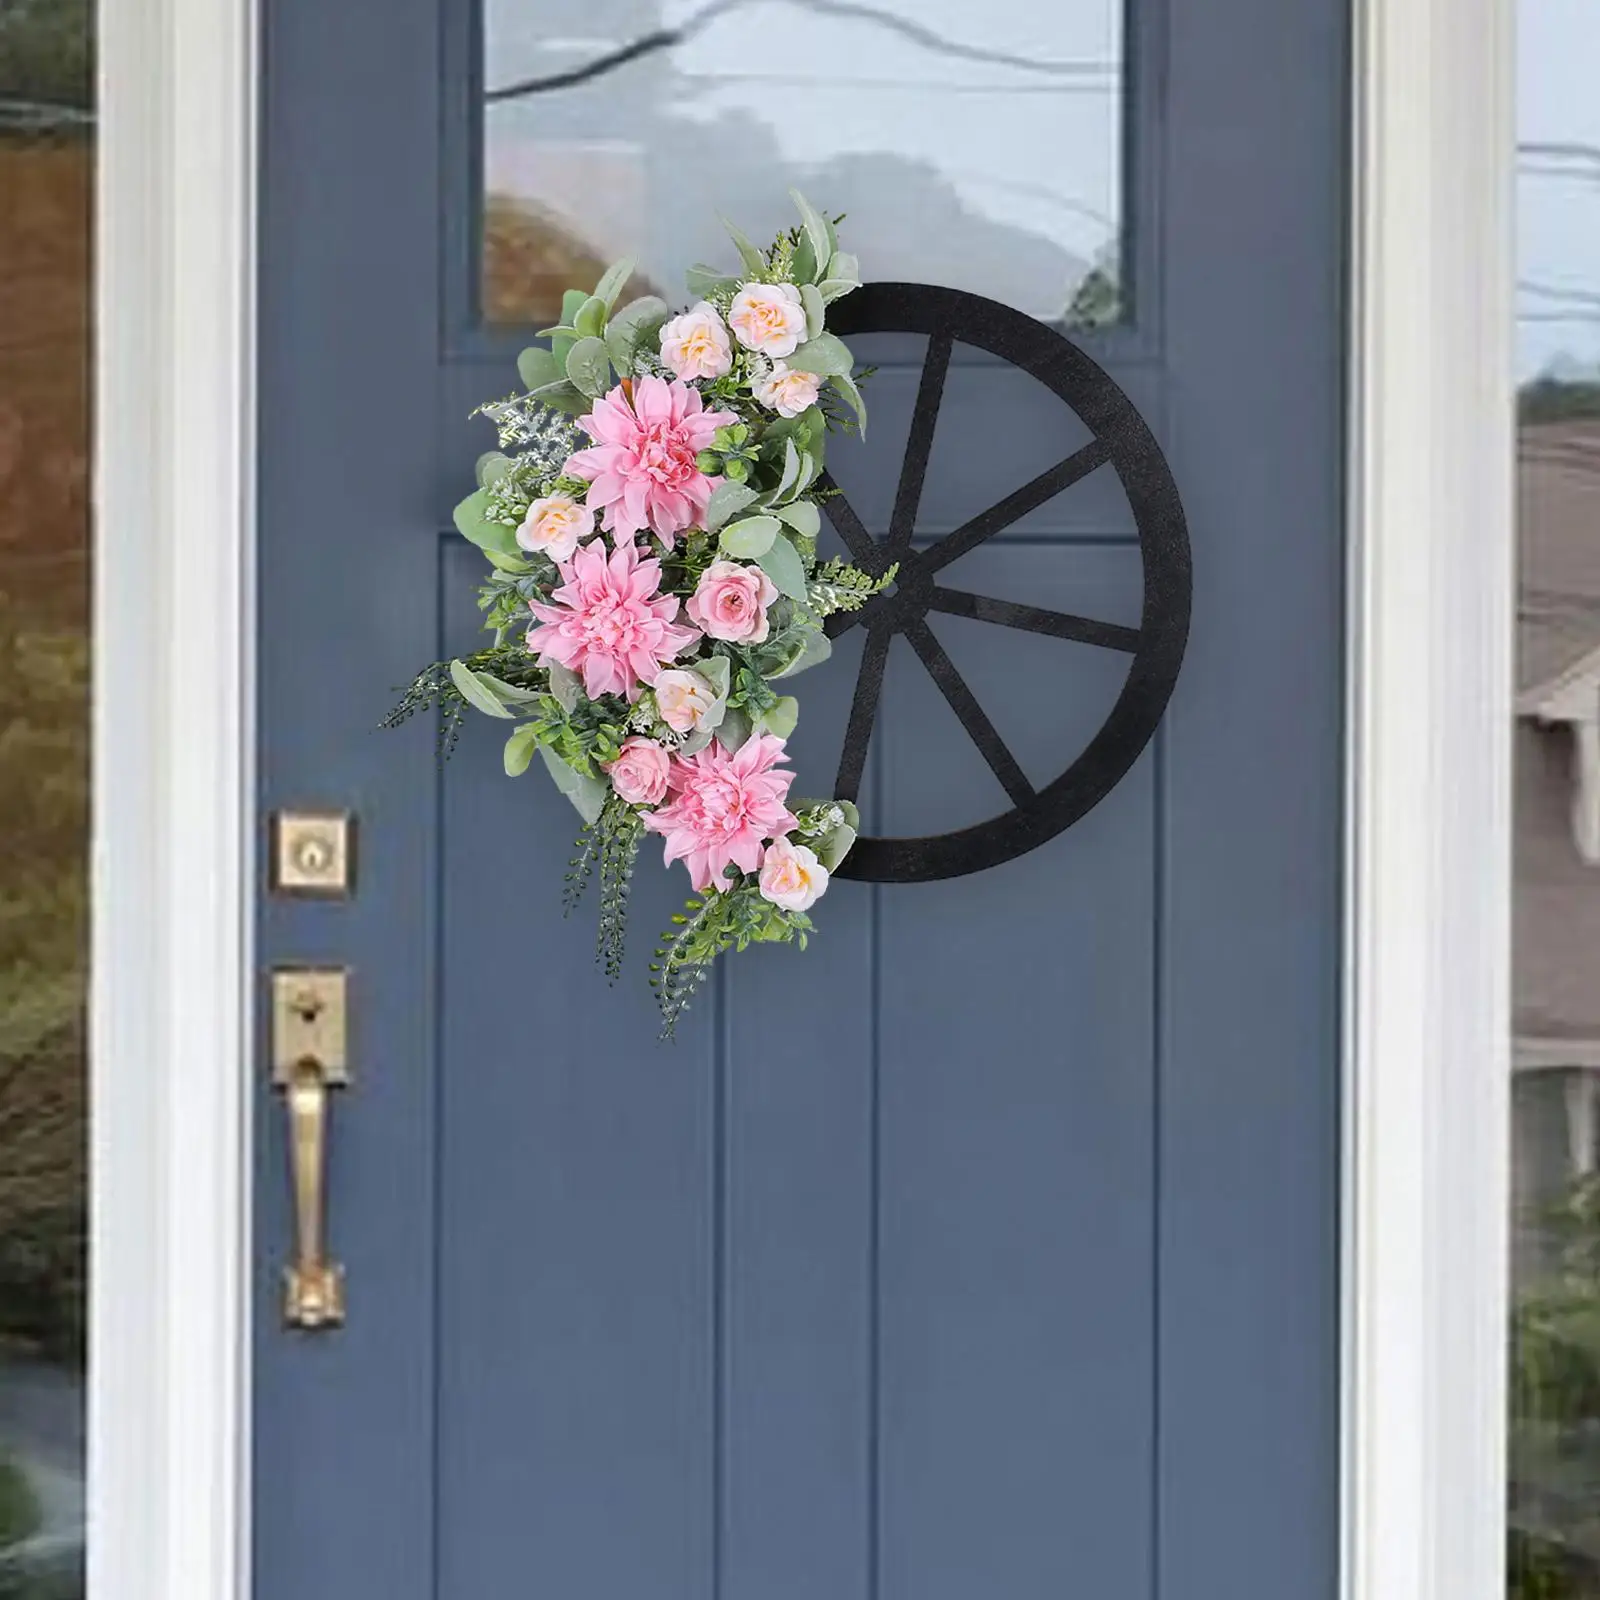 Spring Wreath Pink Artificial Flowers and Wheel Handmade for Home Door Decor